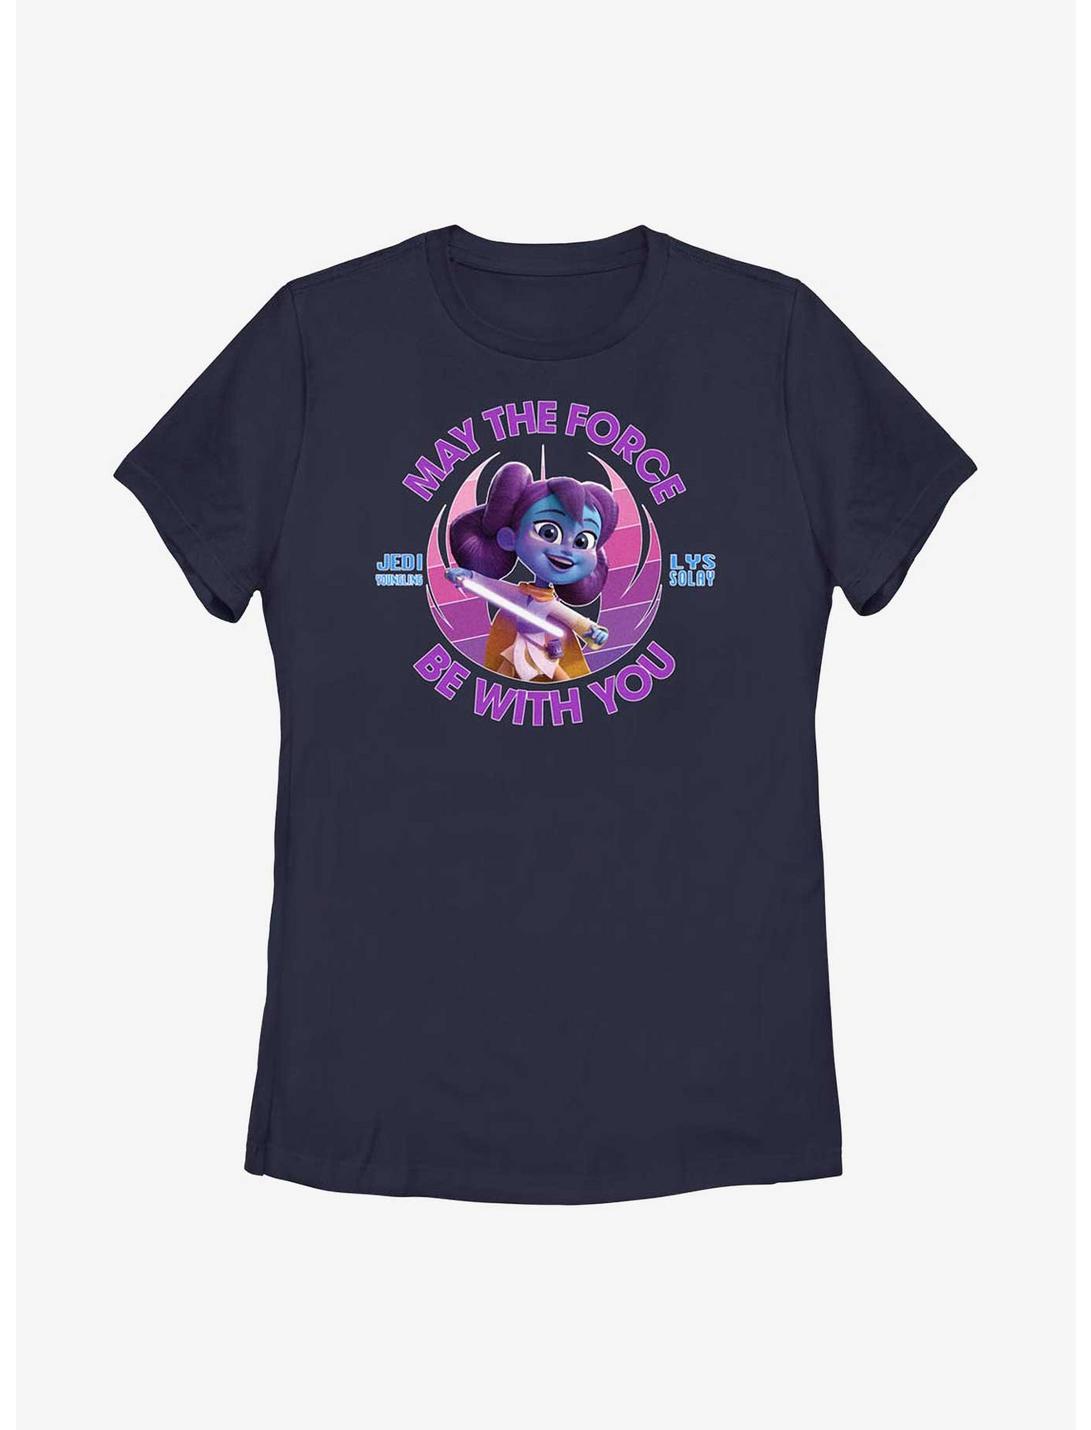 Star Wars: Young Jedi Adventures Lys Solay May The Force Be With You Womens T-Shirt, NAVY, hi-res